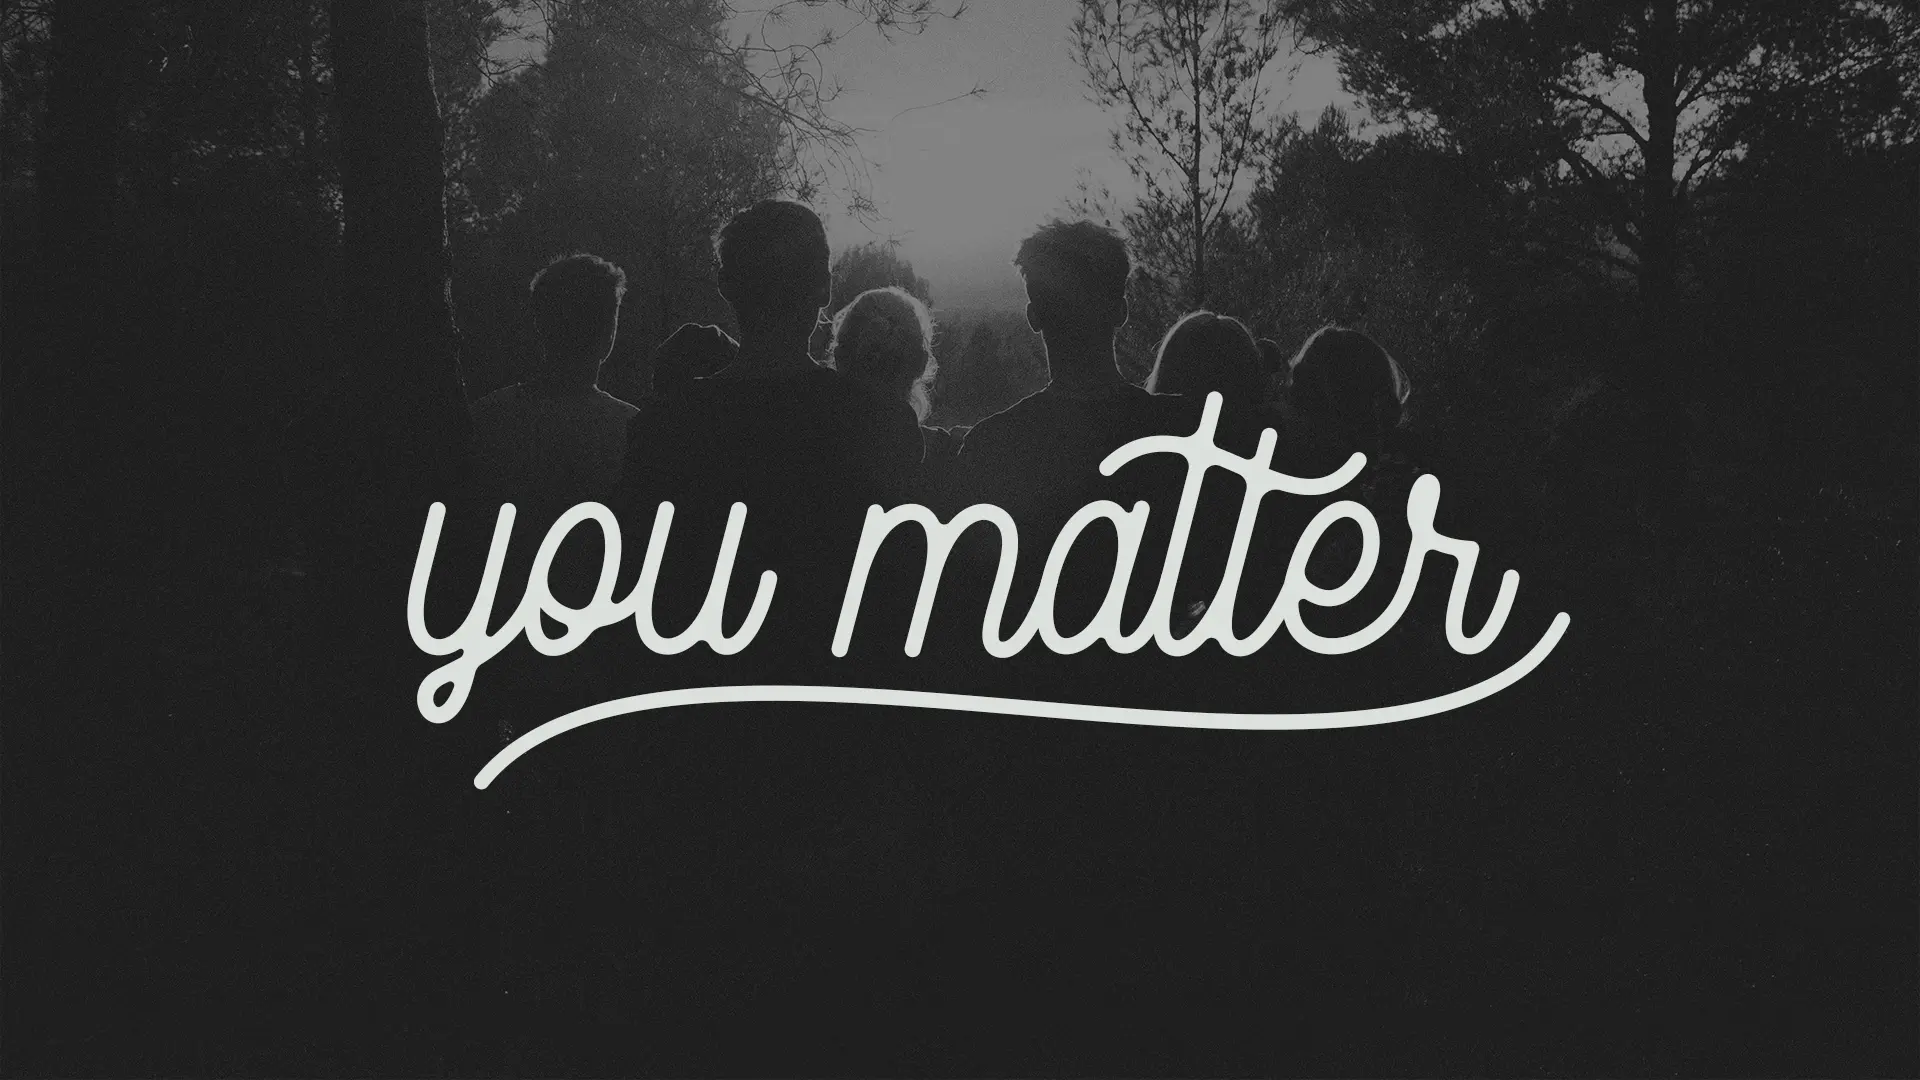 Featured image for “You Matter”